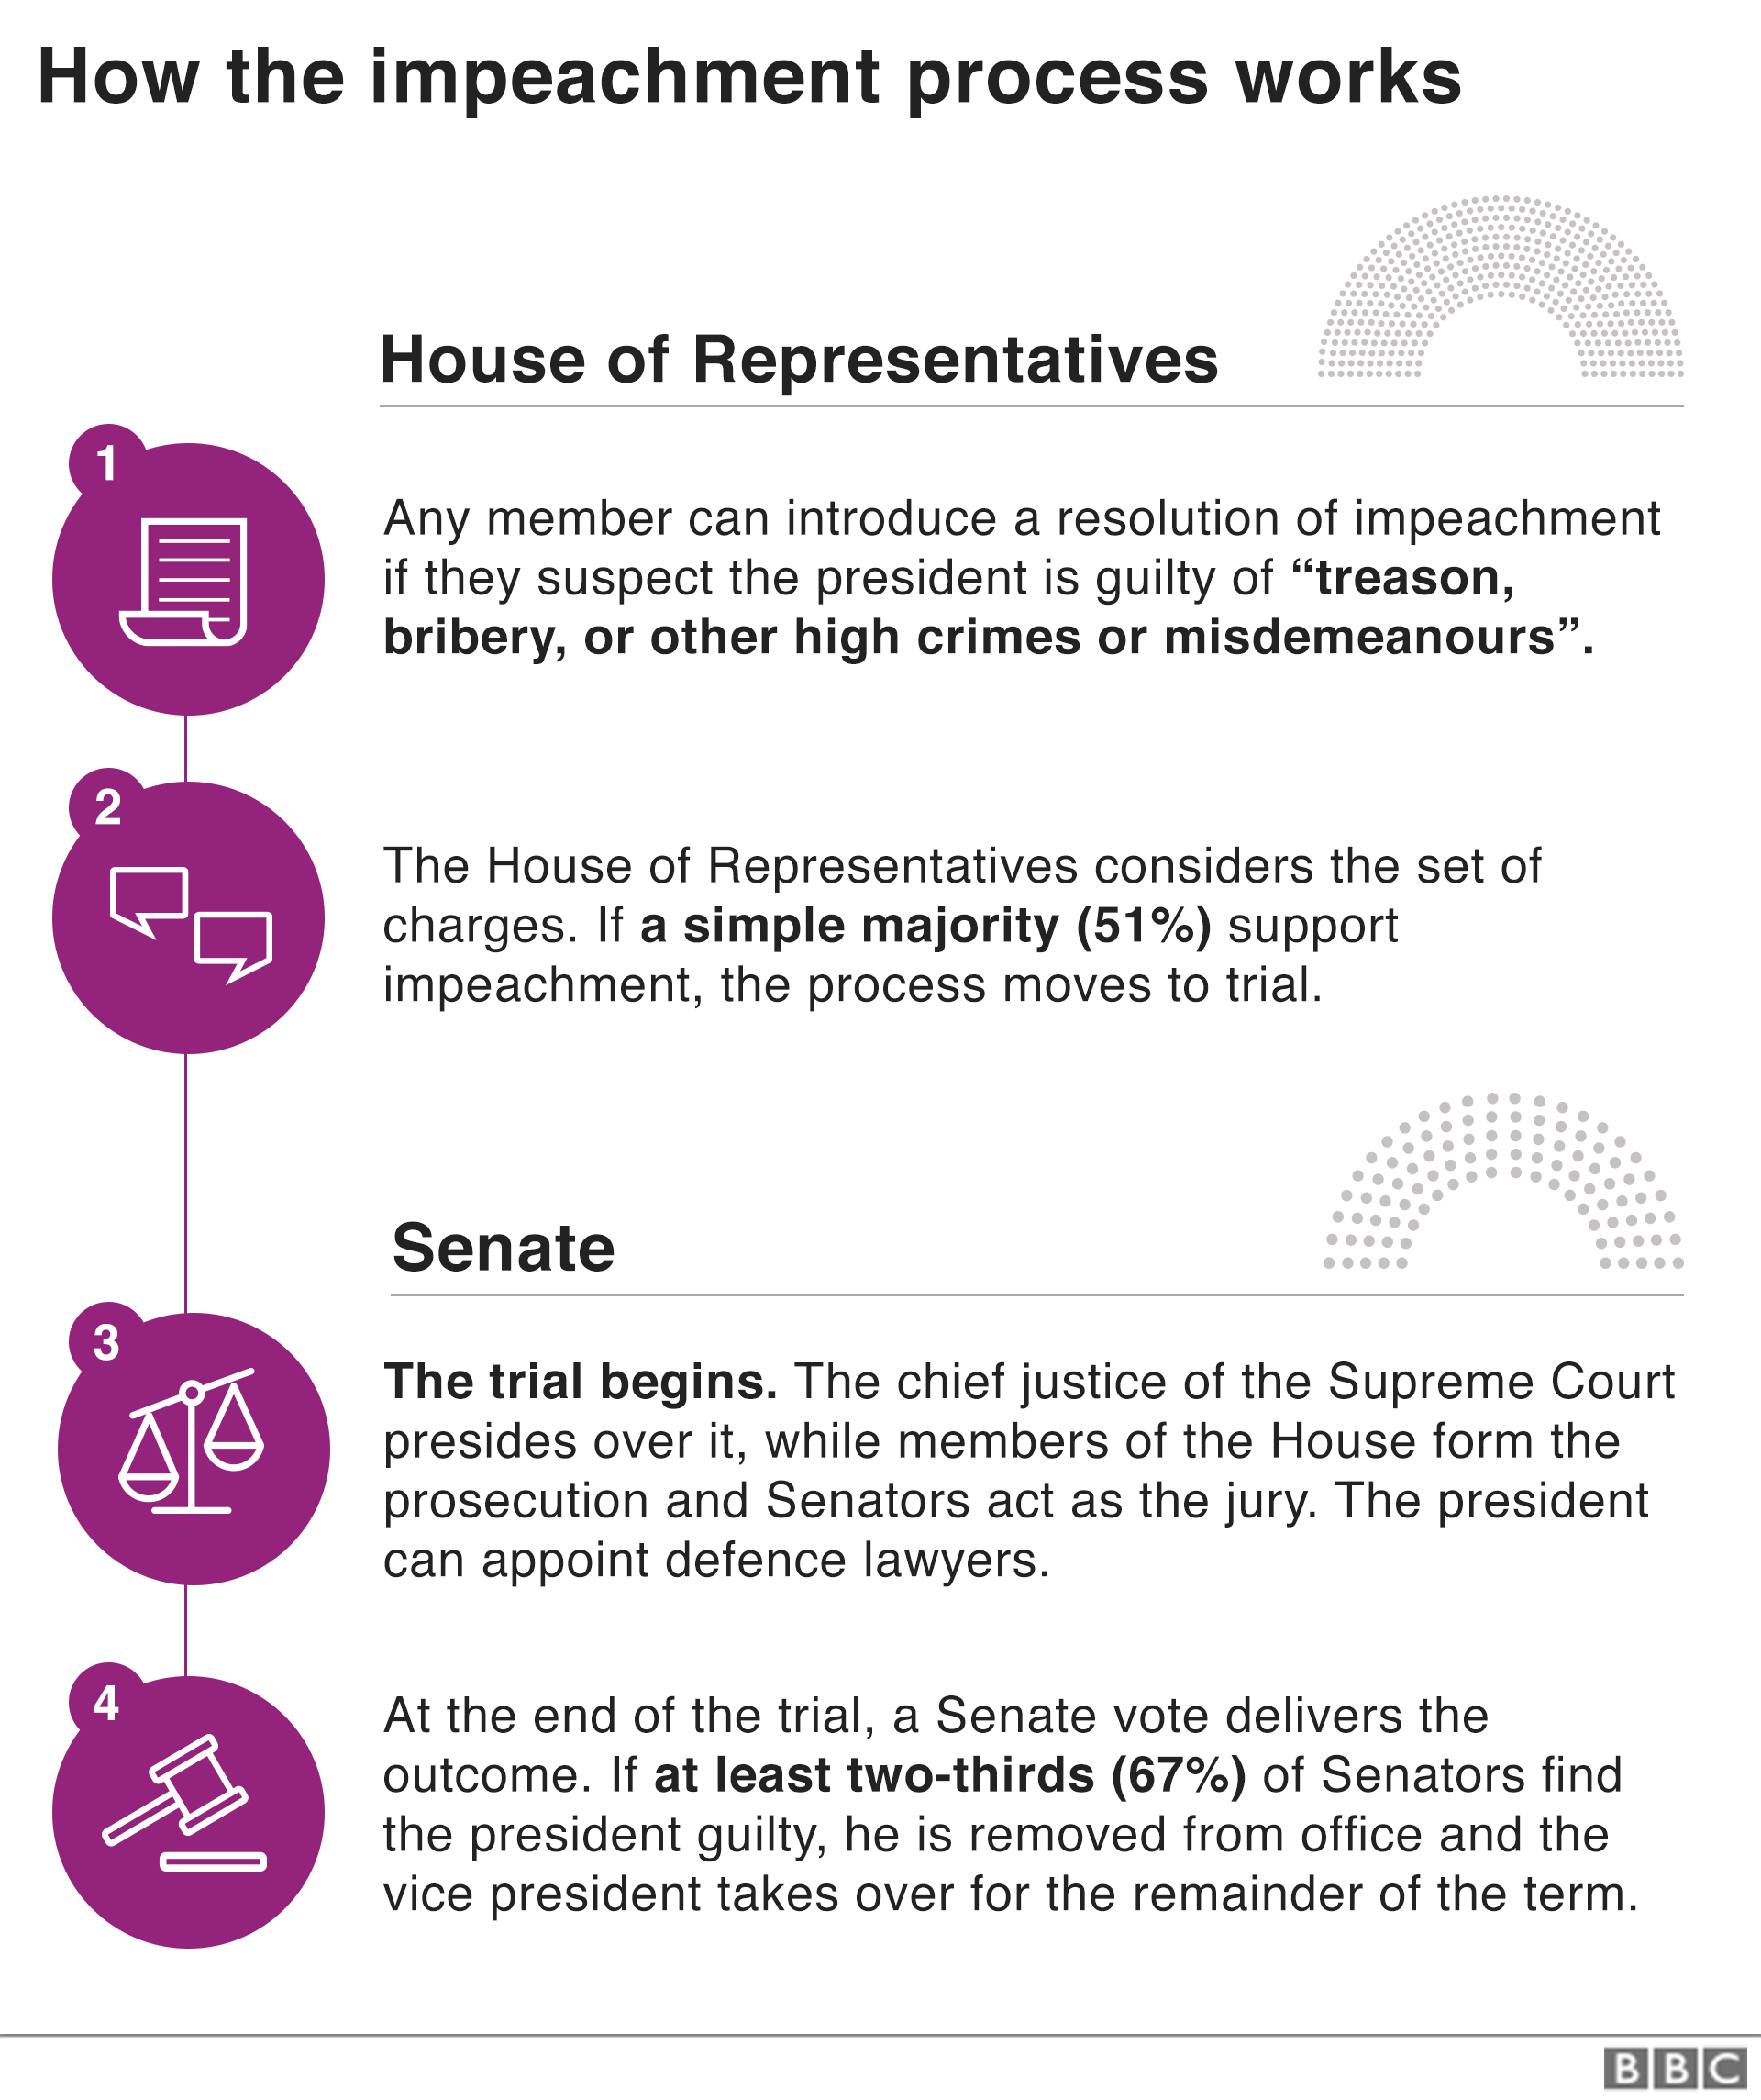 Graphic explaining the impeachment process. Any member of the House can introduce an impeachment resolution, but it has to be passed by a simple majority to make its way to the Senate. A trial is held in the Senate with members of the House forming the prosecution while Senators act as the jury. The president is able to appoint defence lawyers. Senators vote on the outcome, and if at least two thirds find him guilty, he is removed from office.